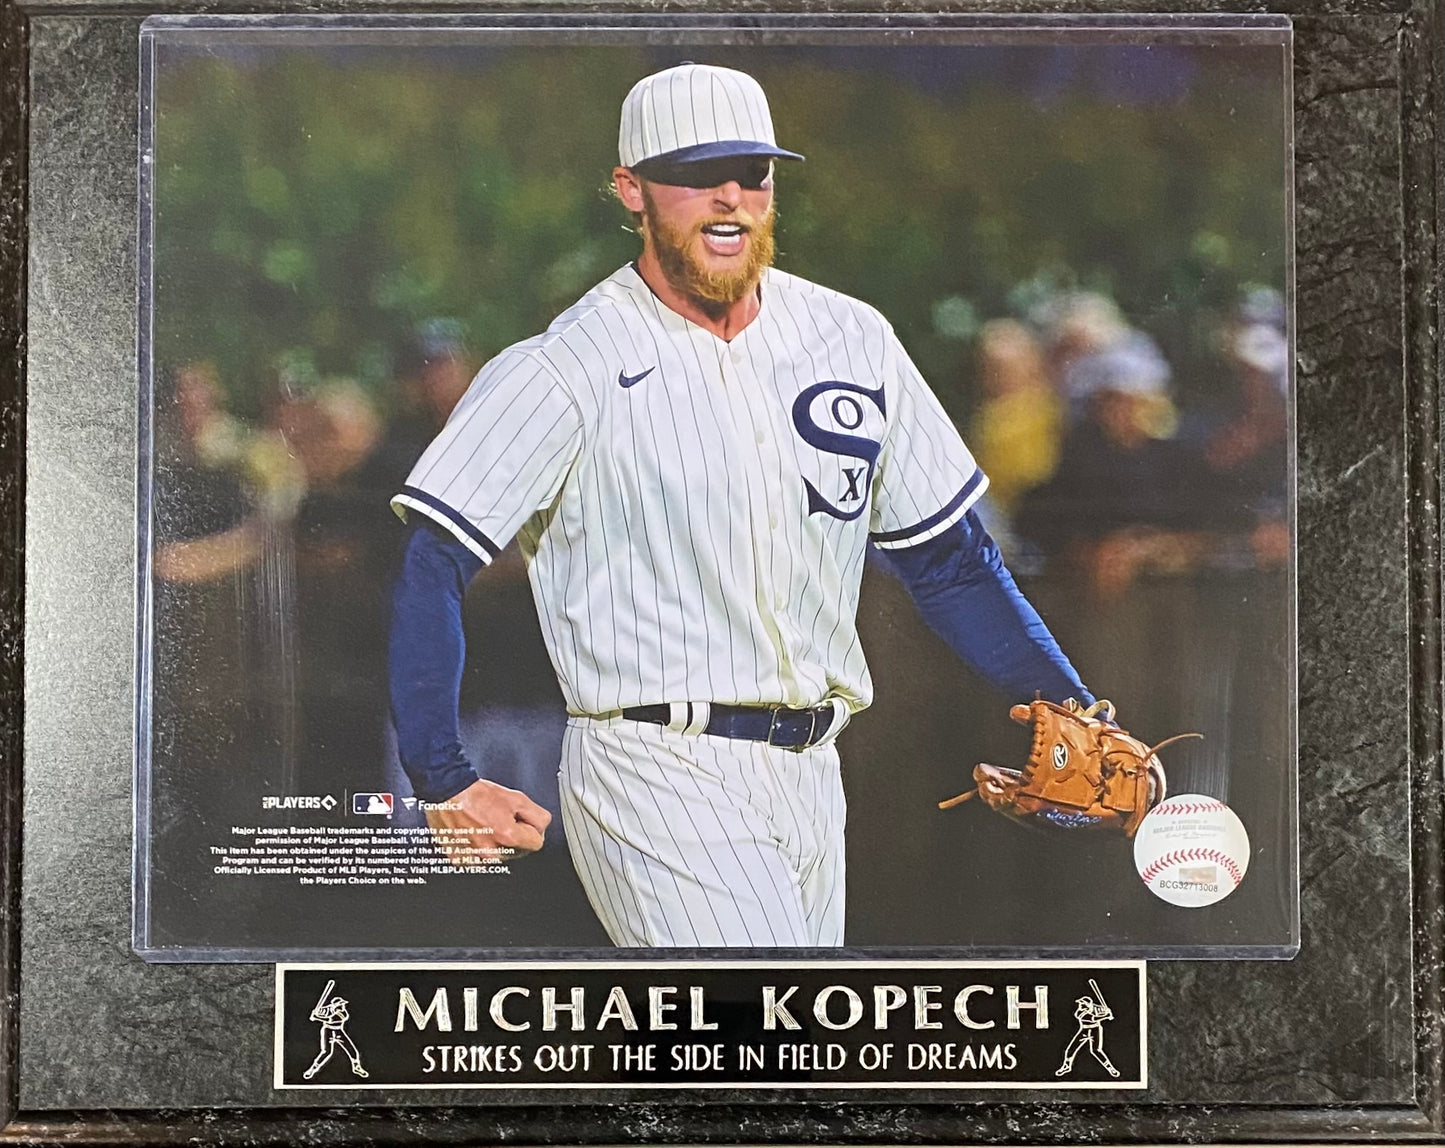 Michael Kopech Strikes Out The Side In The Field Of Dreams Wall Plaque